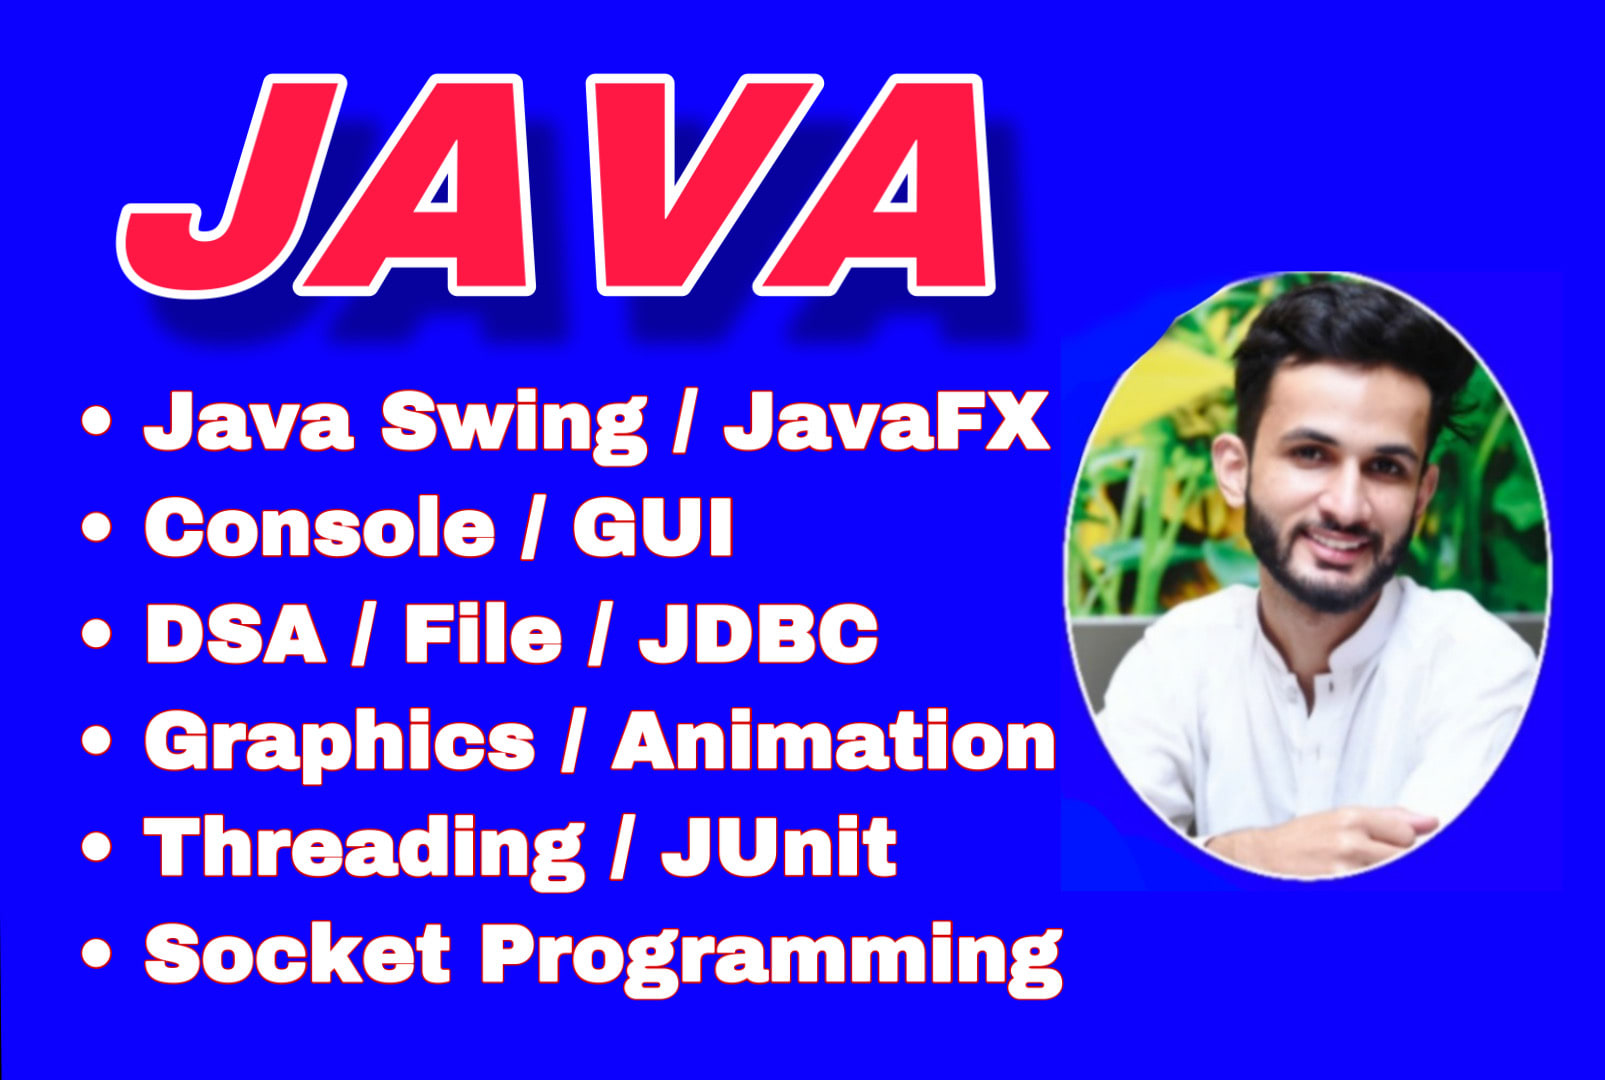 Do java console javafx java swing gui projects and tasks by Bilalmirza061 |  Fiverr